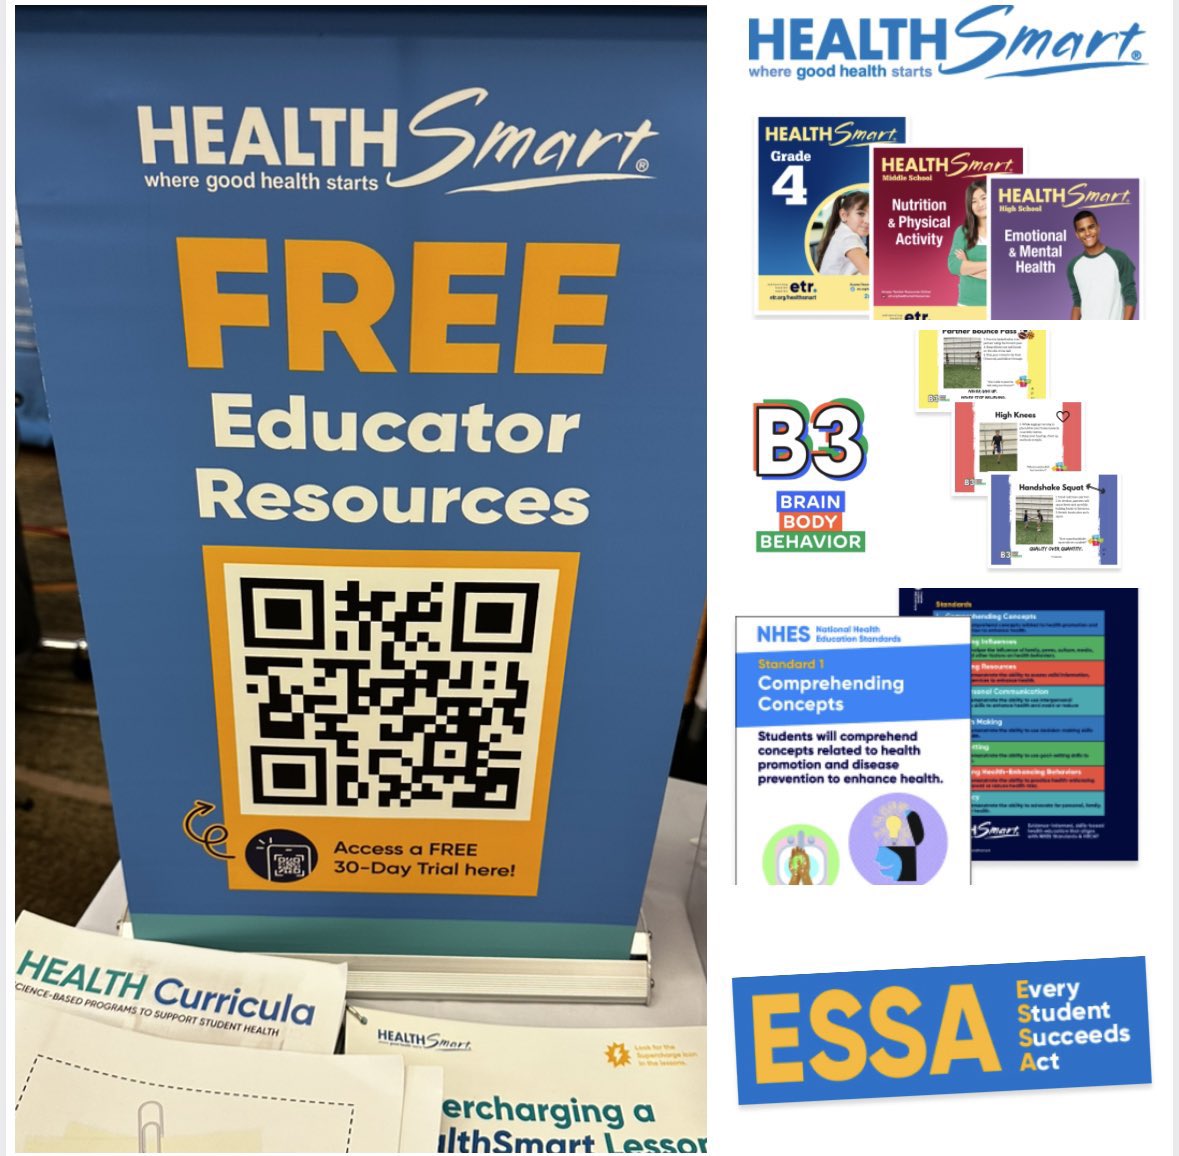 Hey #NCSHAPE23, like free stuff? Check out all these FREE resources and samples to take back to your school! Scan the QR code or use the direct link below to complete the quick and easy form: share.hsforms.com/1HhrXaf-VQ6utk…